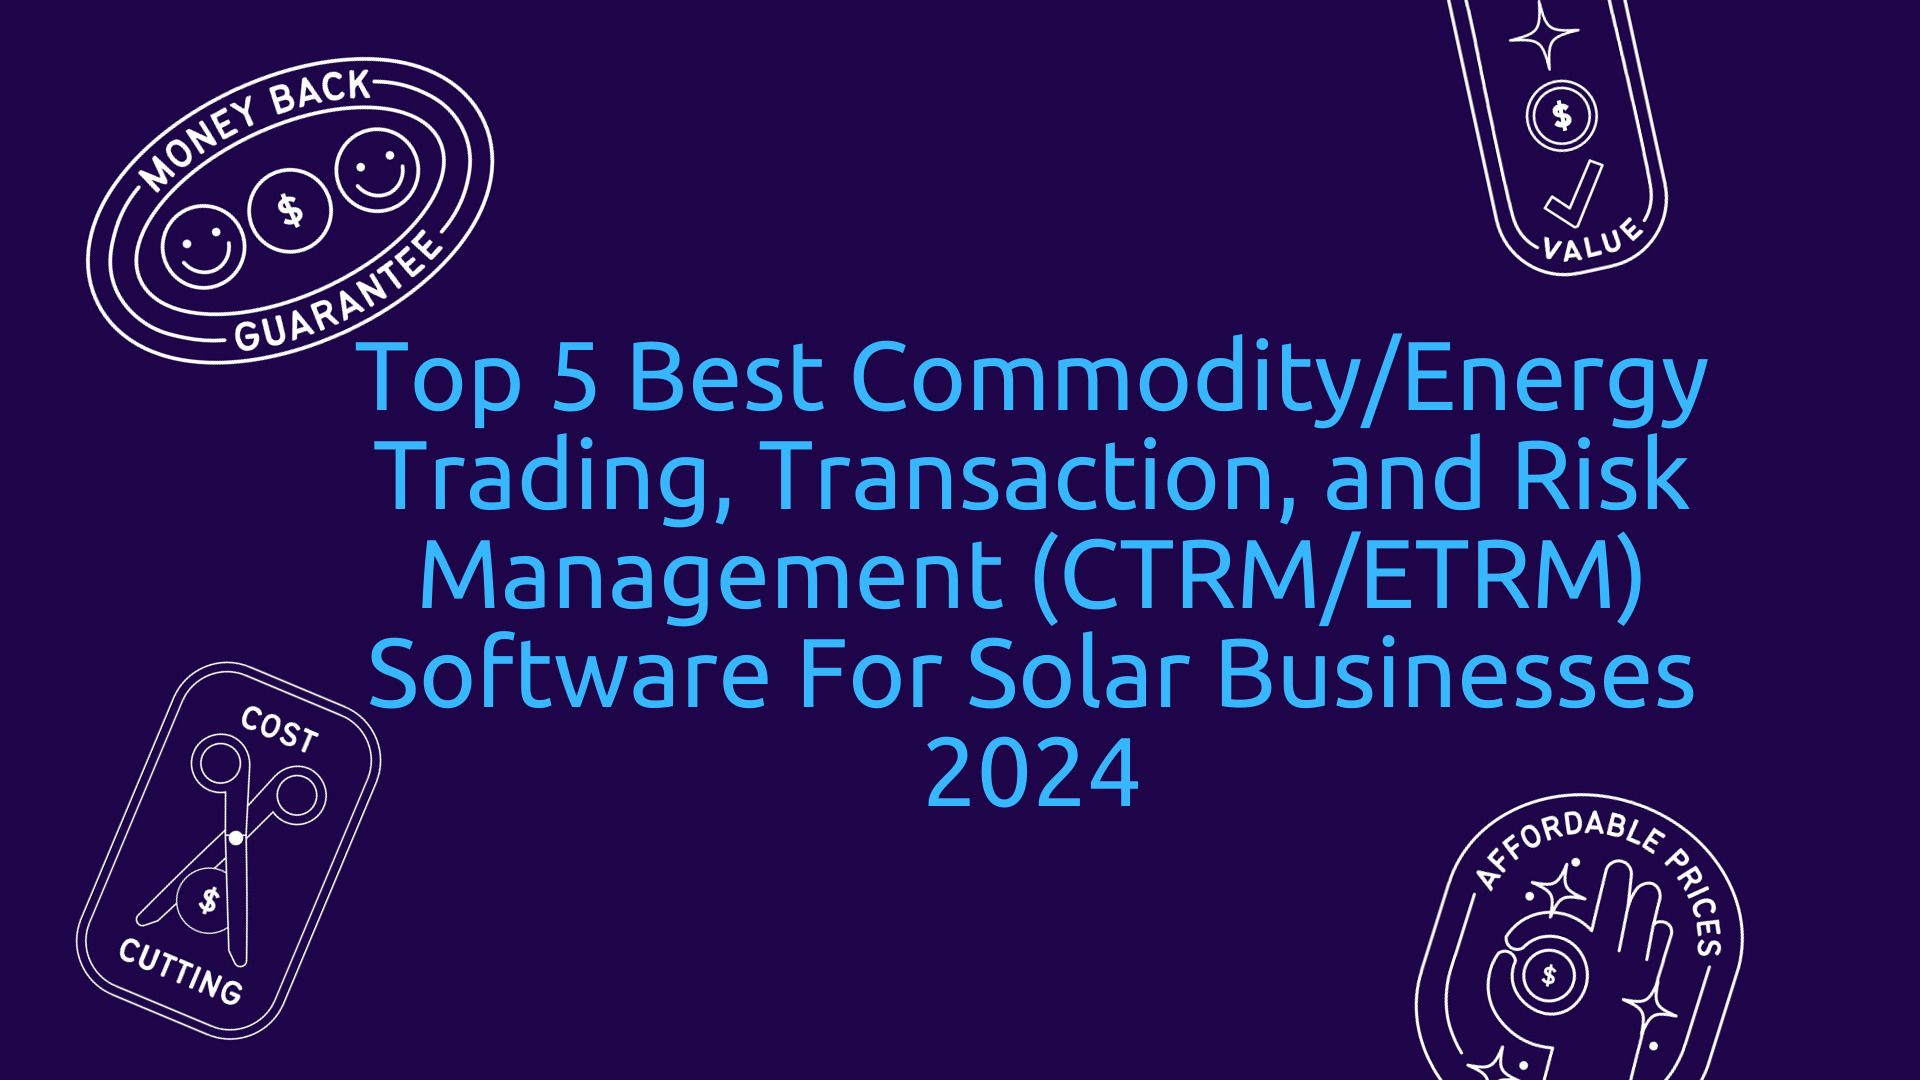 Top 5 Best Commodity/Energy Trading, Transaction, and Risk Management (CTRM/ETRM) Software For Solar Businesses 2024